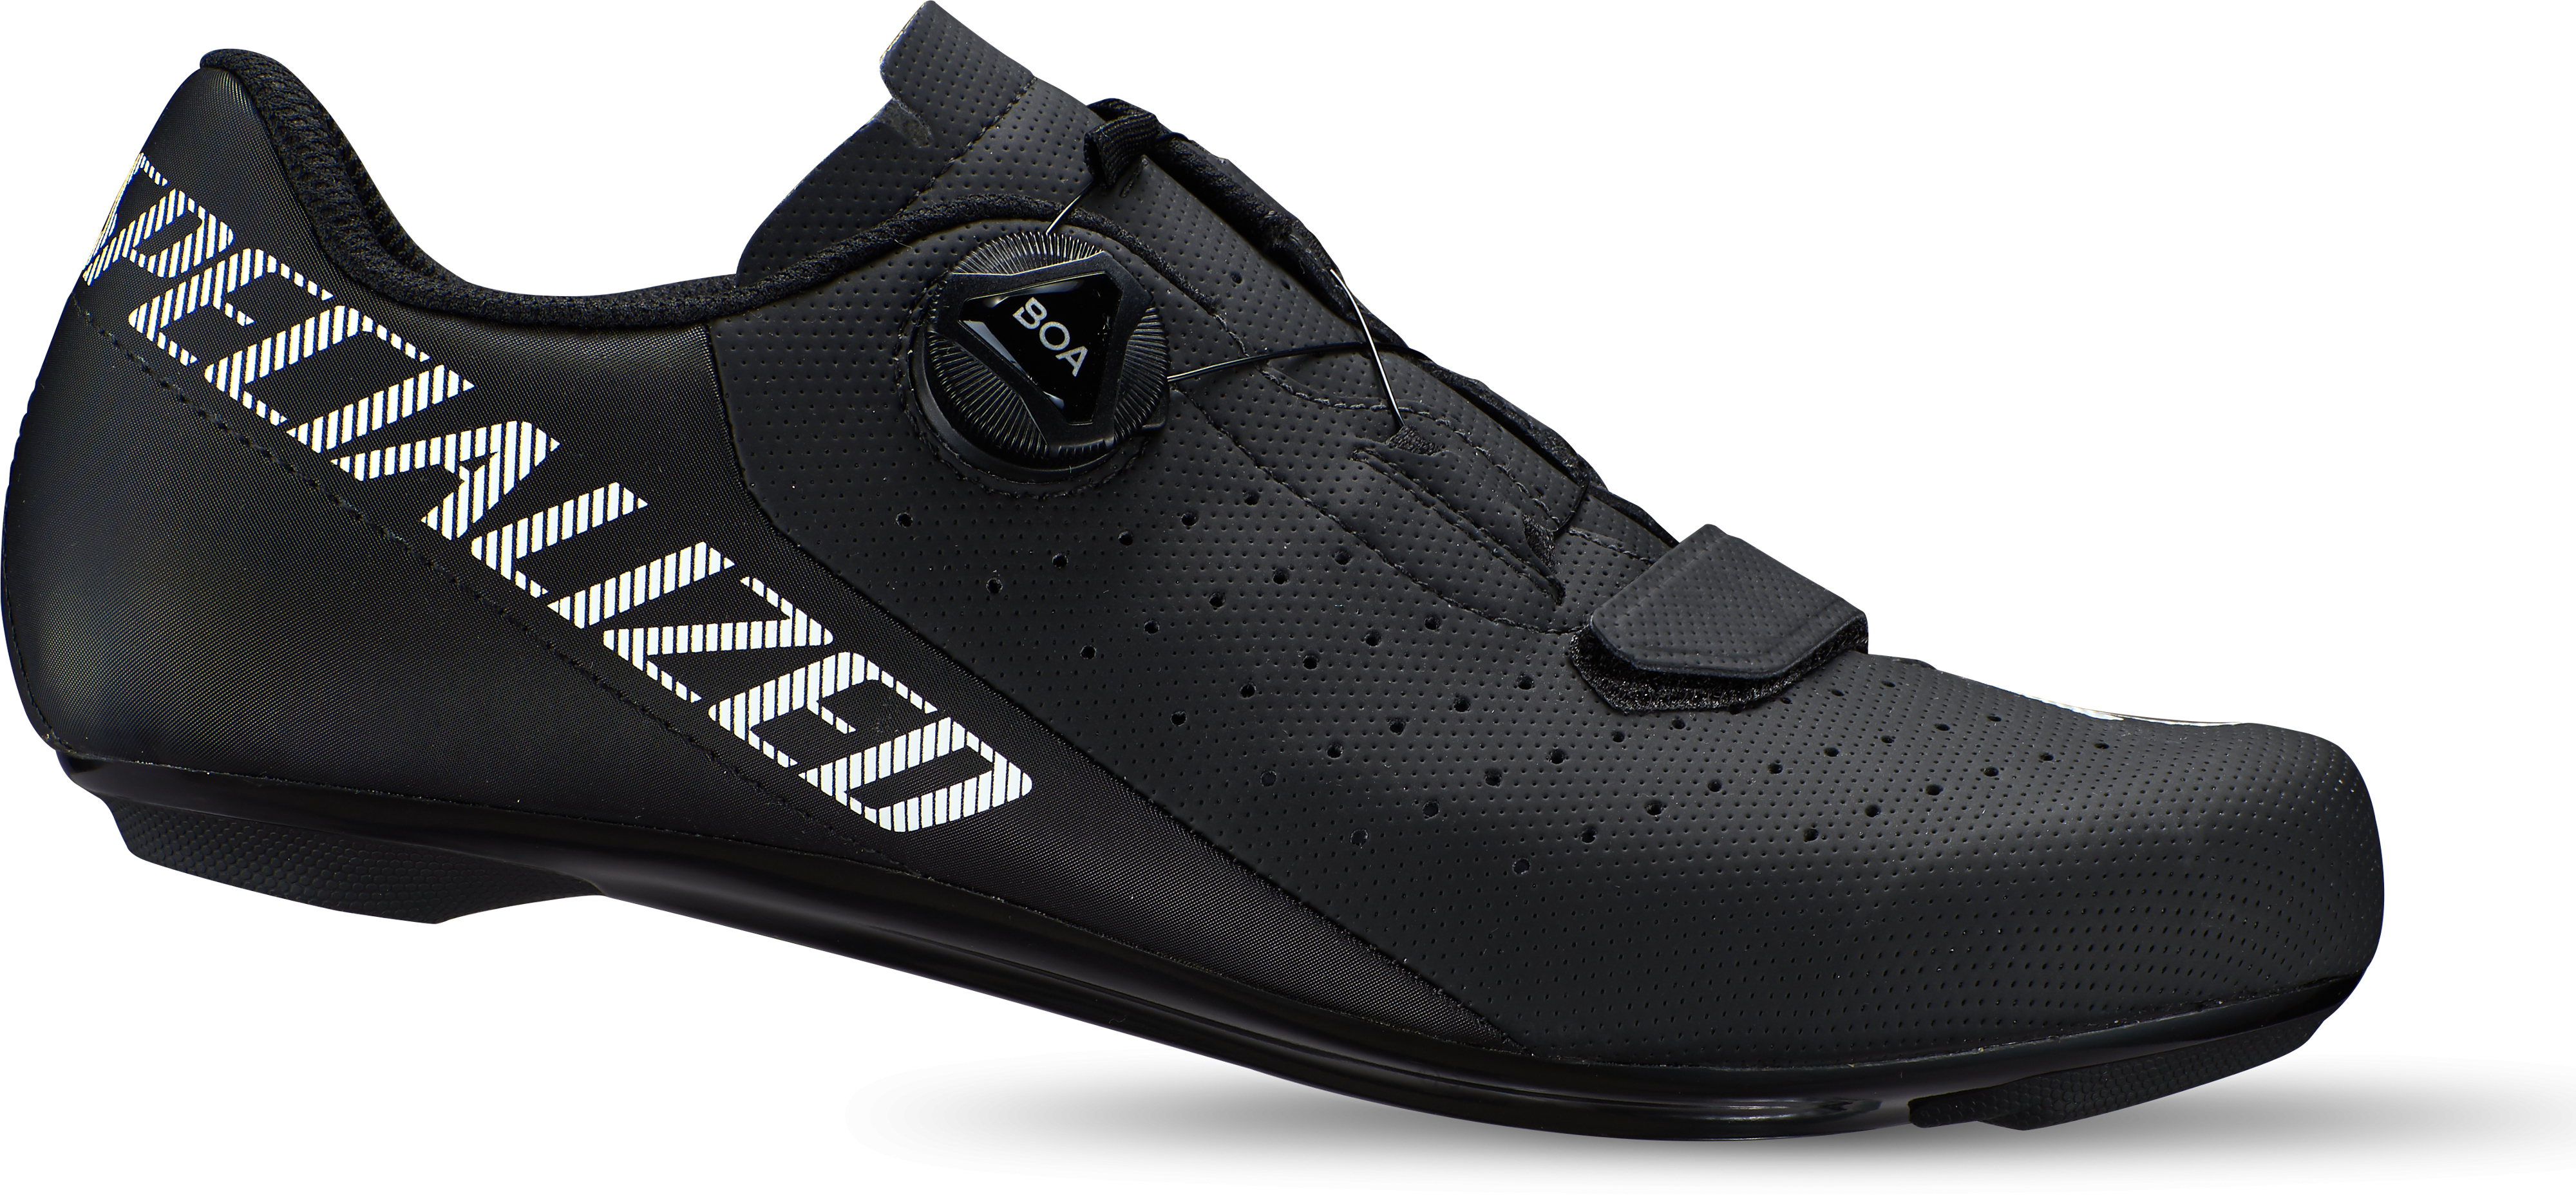 Specialized  Torch 1.0 Road Cycling Shoes  46 Black